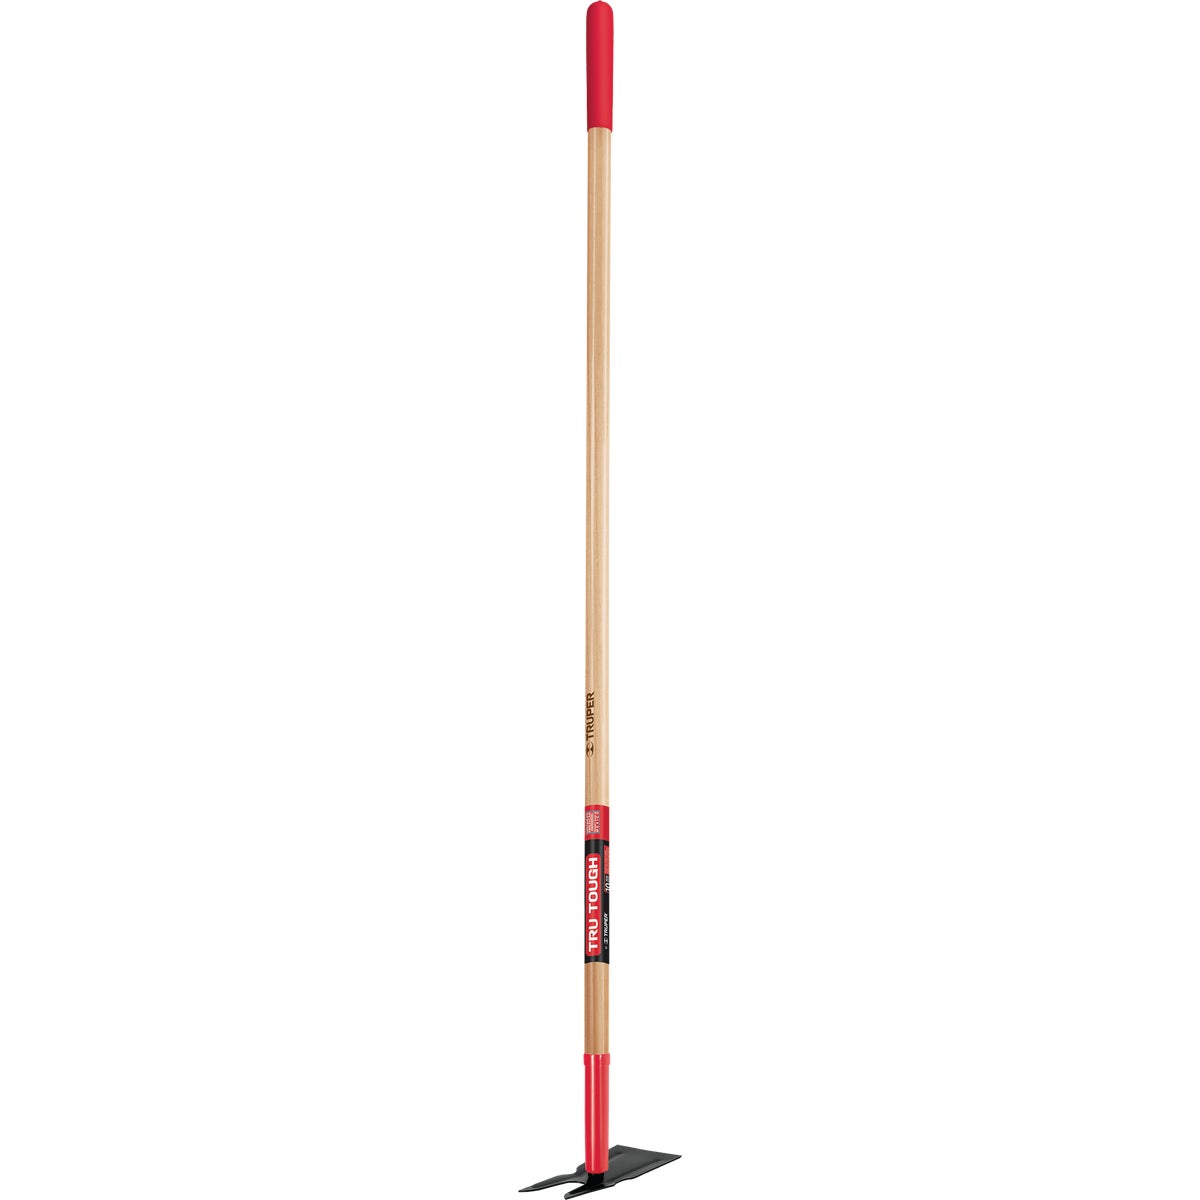 Item 701761, 2-prong weeding hoe is designed for close cultivation around existing 